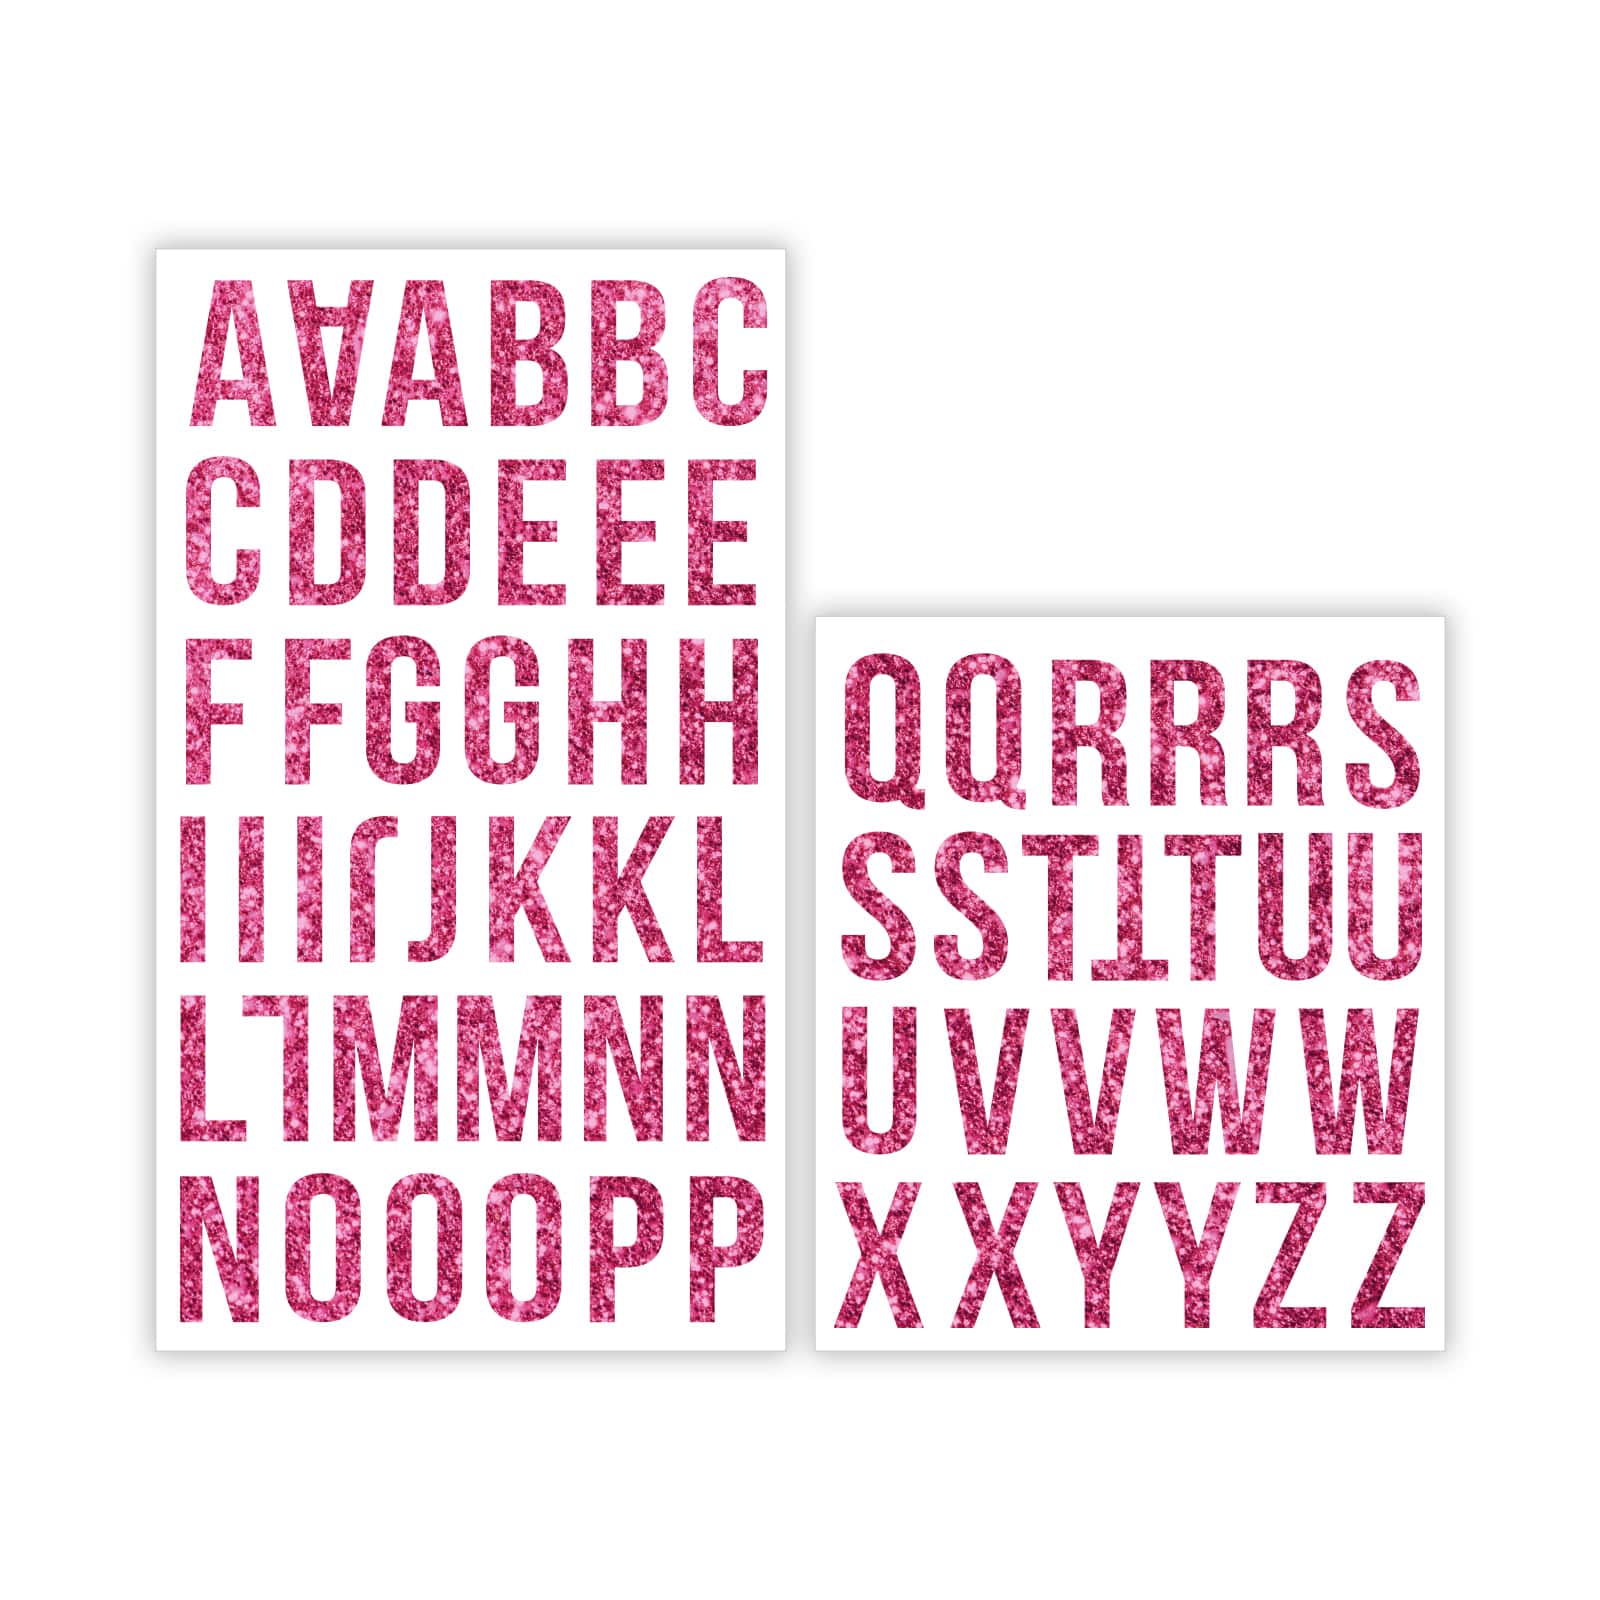 10 4" PINK IRON ON LETTERS & NUMBERS TRANSFER PRINTING 